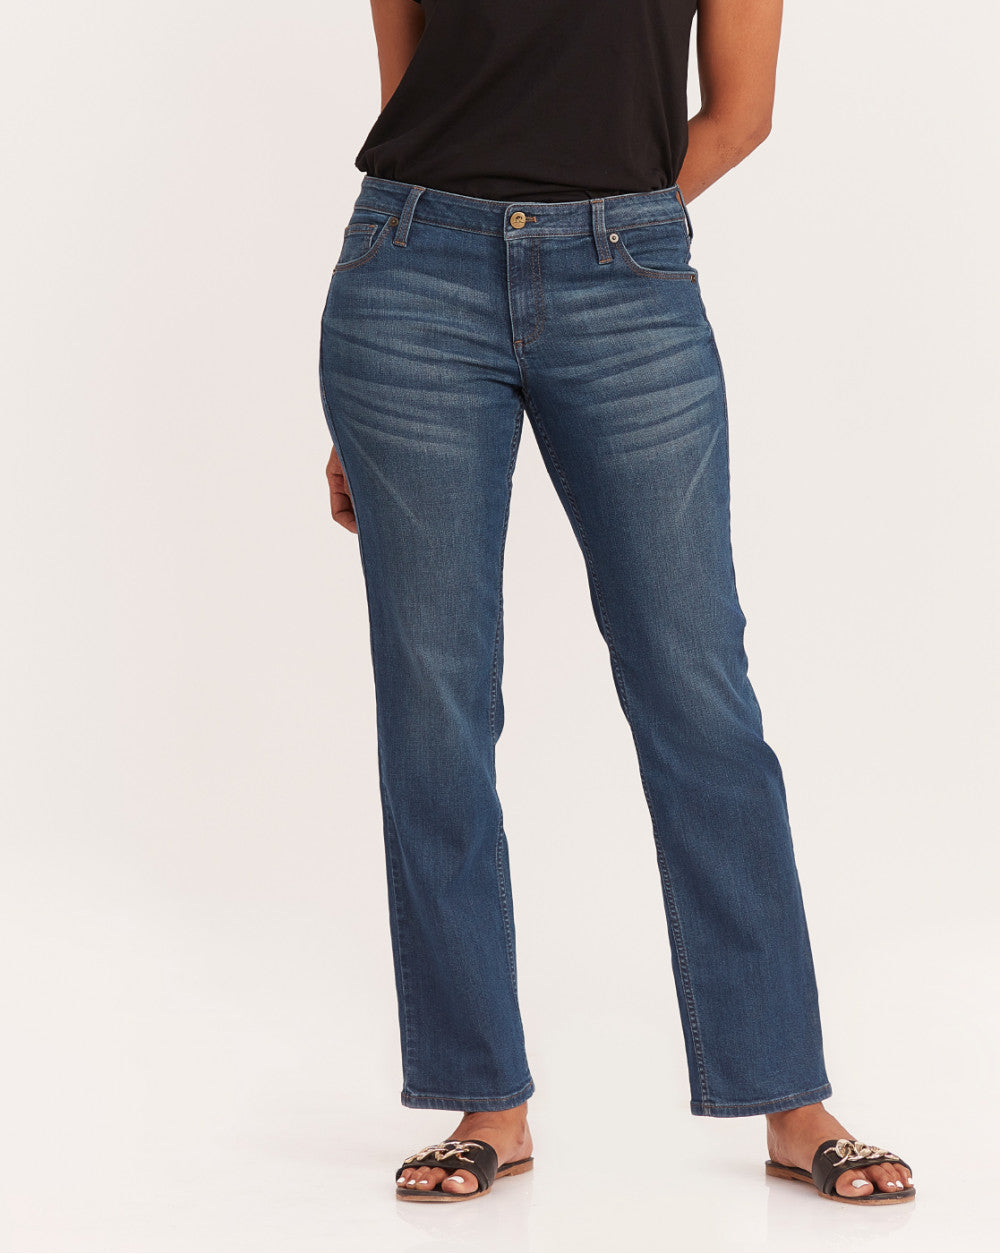 Straight Fit Waist Jeans - Classic Blue